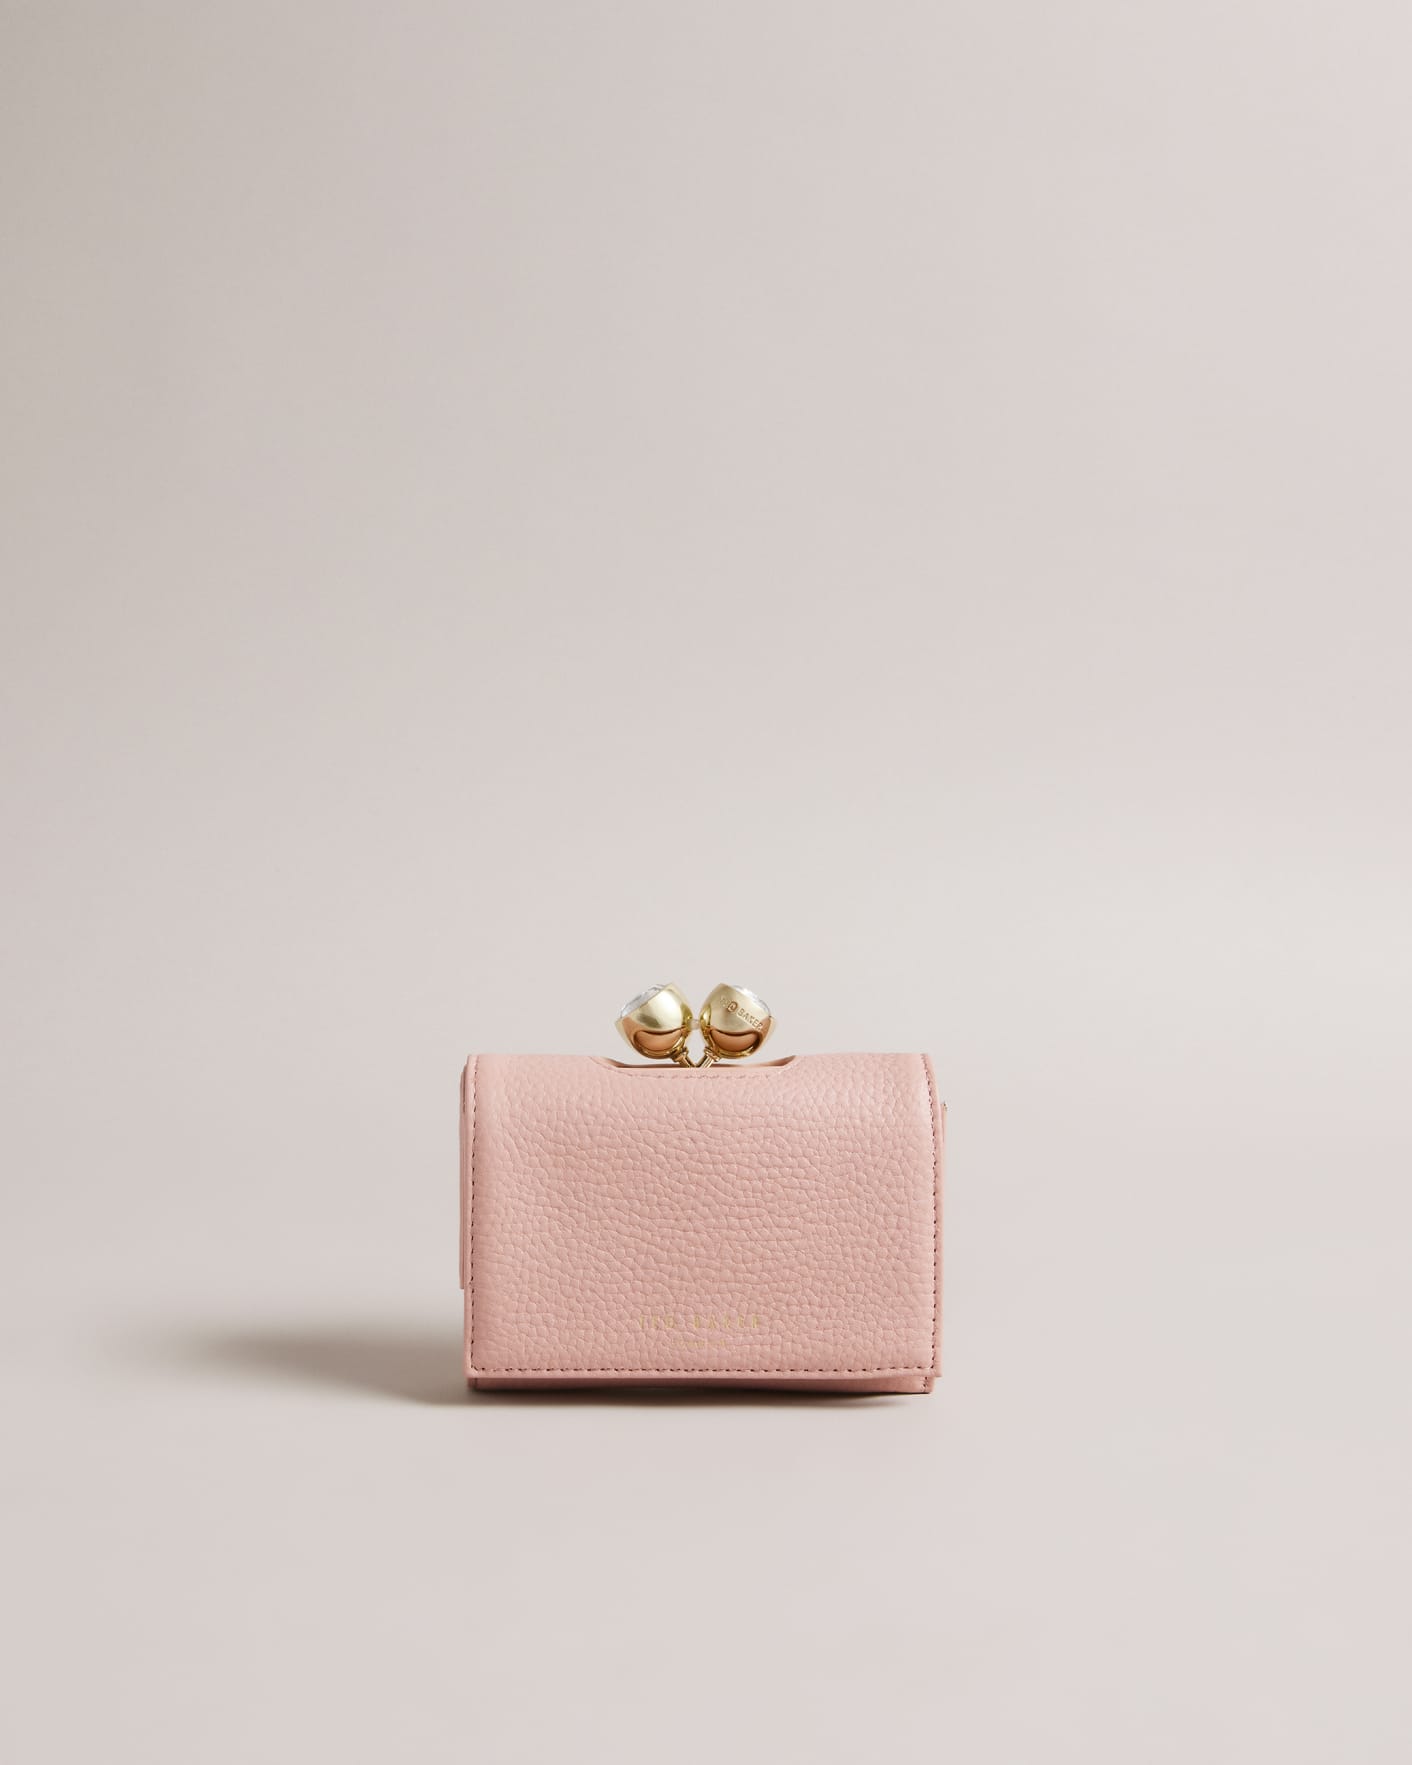 ROSIELA - PL-PINK | Accessories | Ted Baker ROW